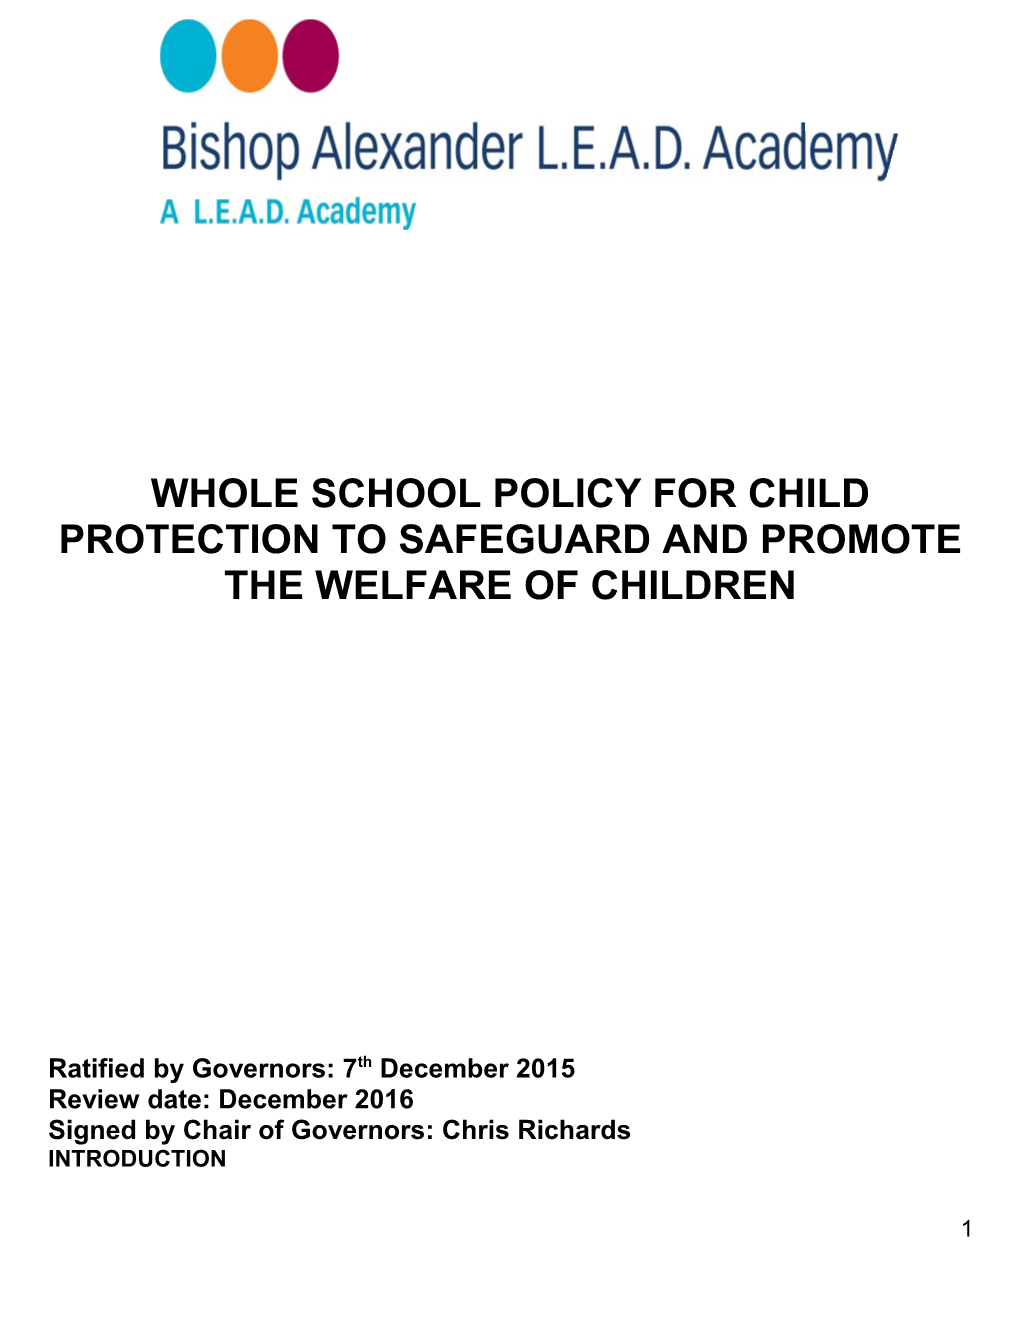 Whole School Policy for Child Protection to Safeguard and Promote the Welfare of Children